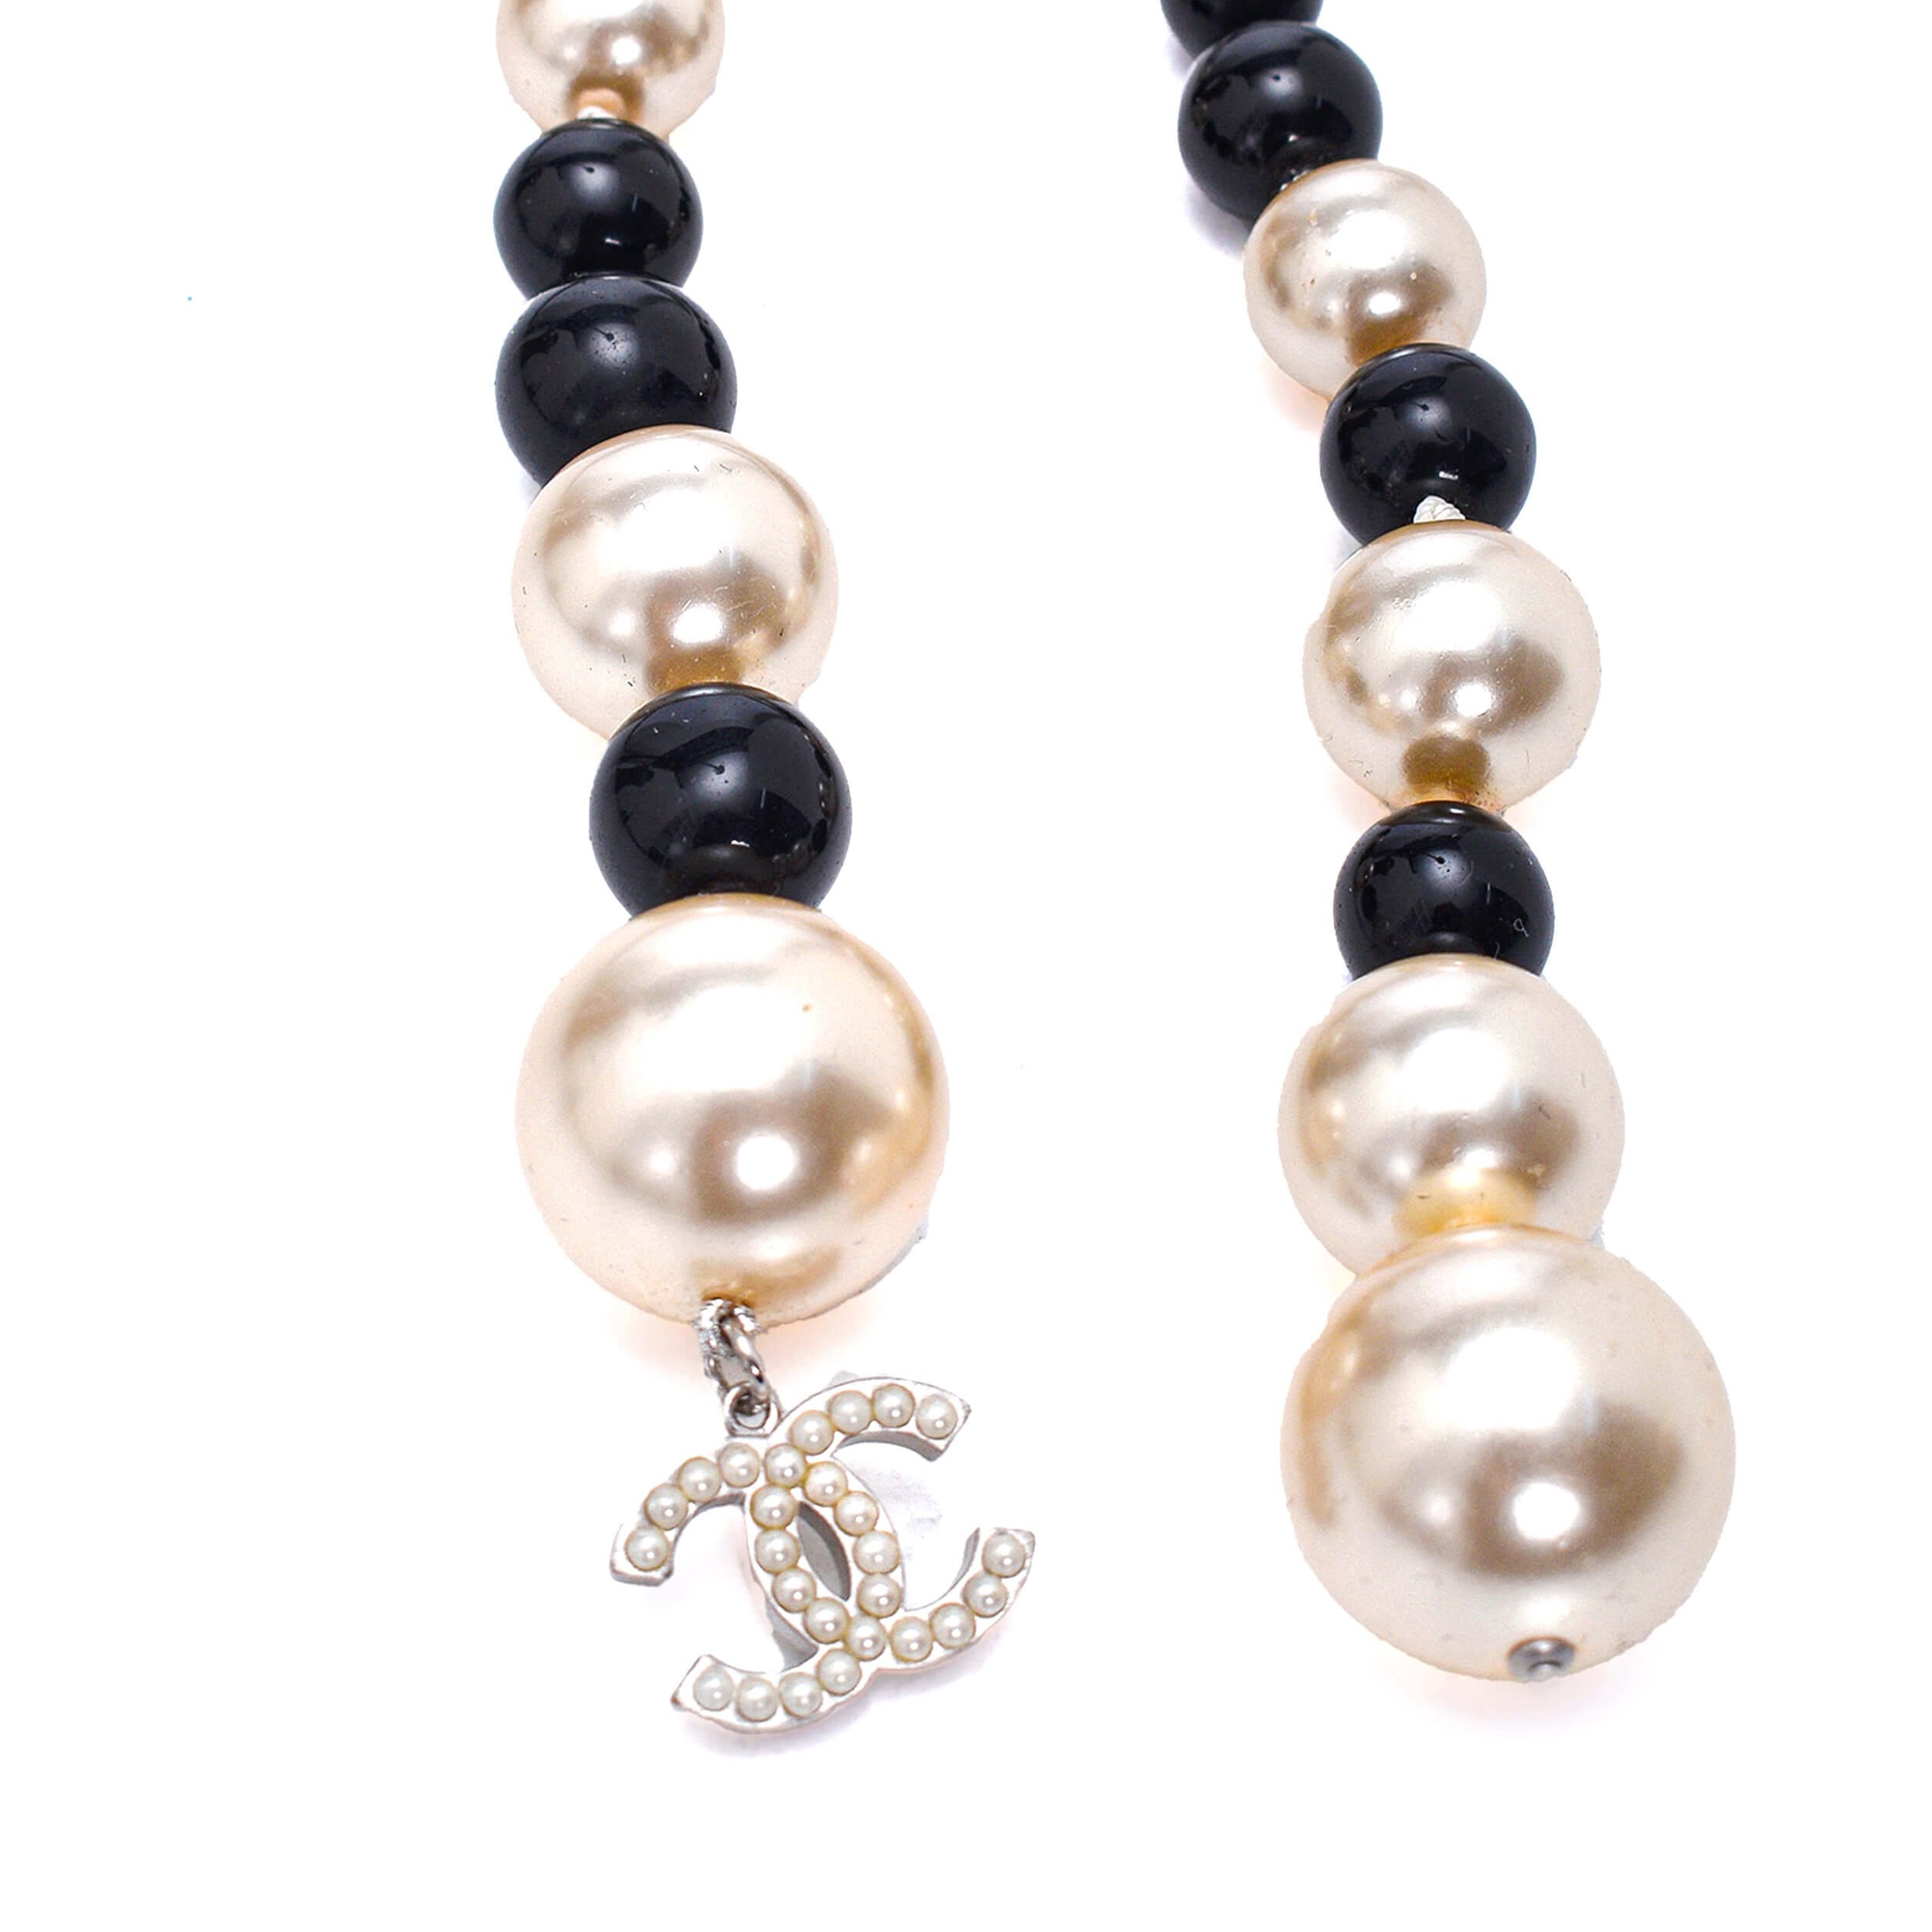 Chanel - Black&White Pearl CC Long Necklace